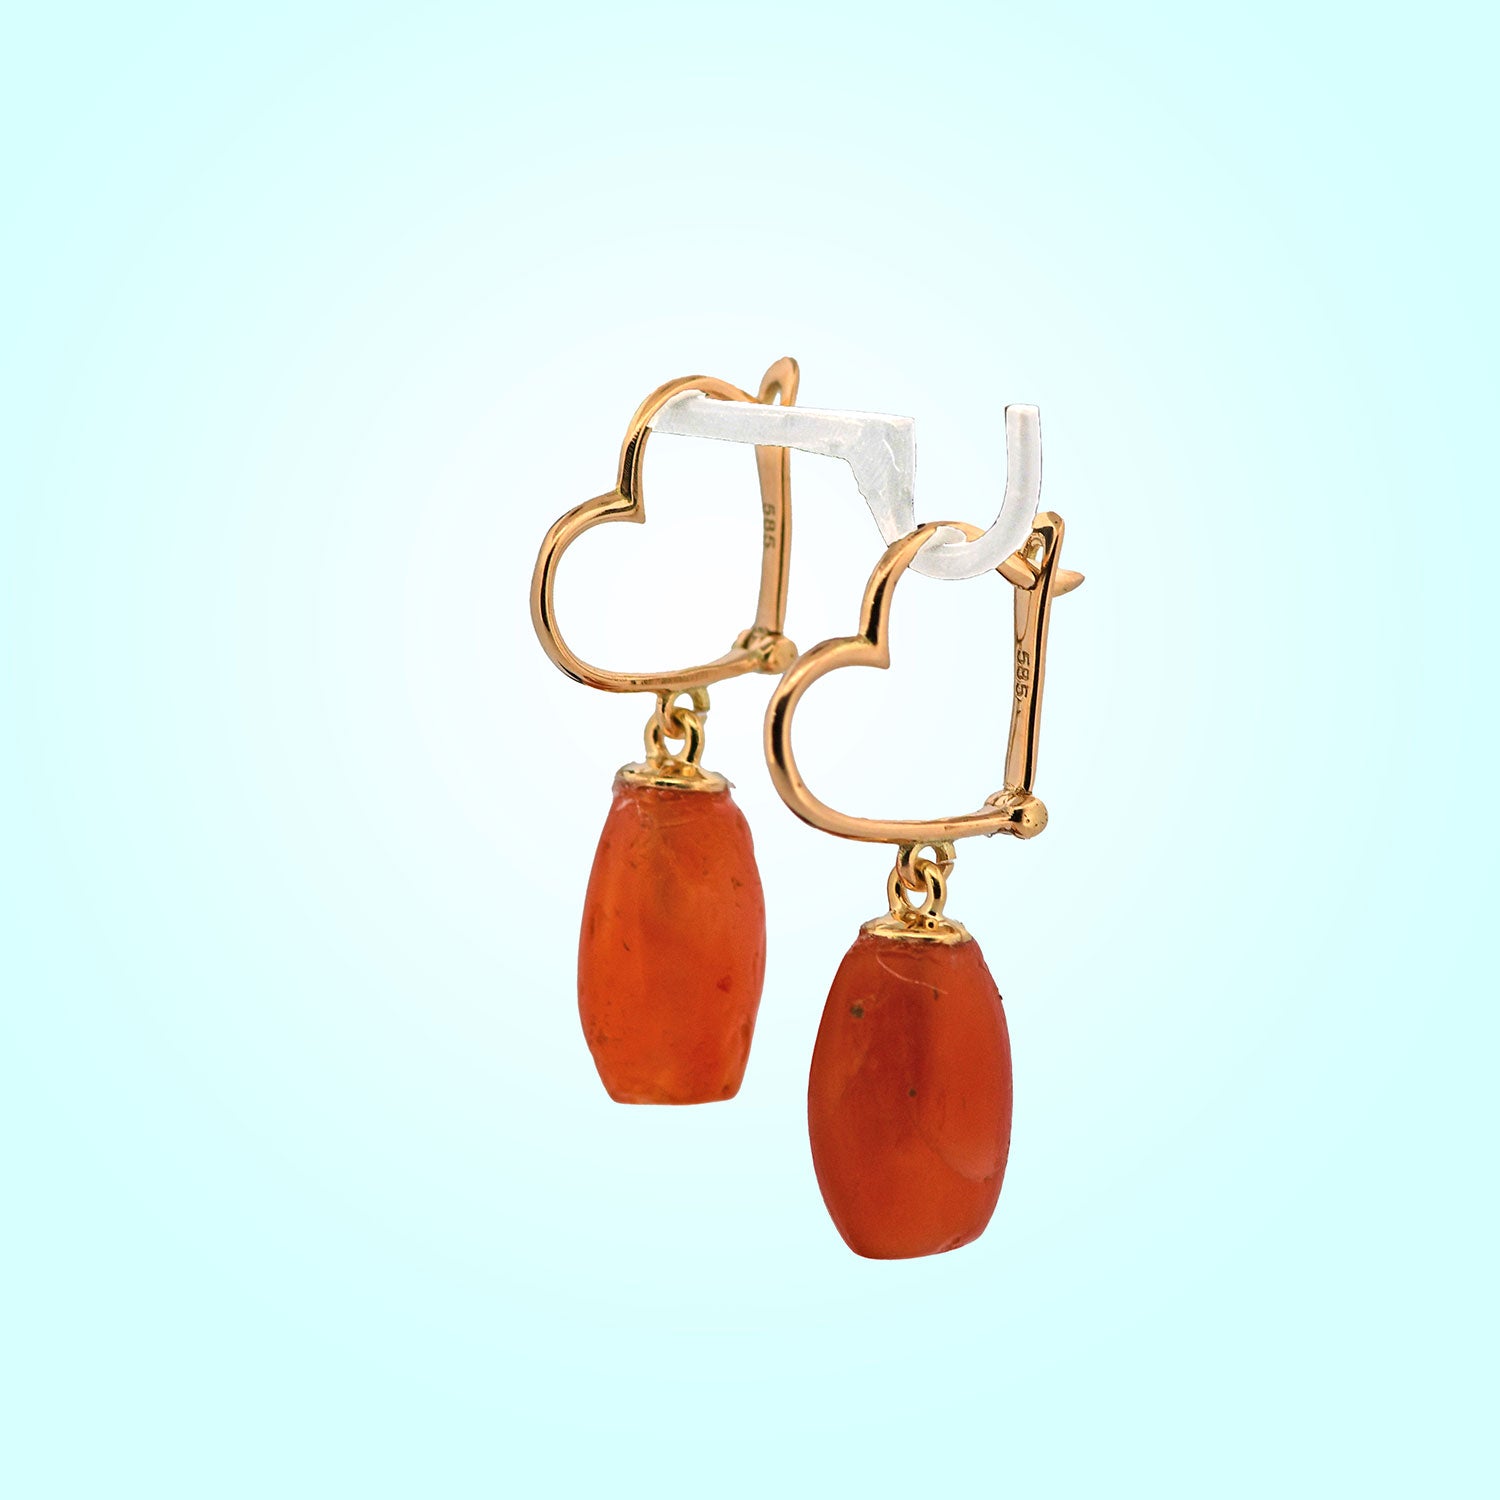 A pair of Roman Carnelian Beads set as Earrings, Roman Imperial Period, ca. 1st - 2nd century CE